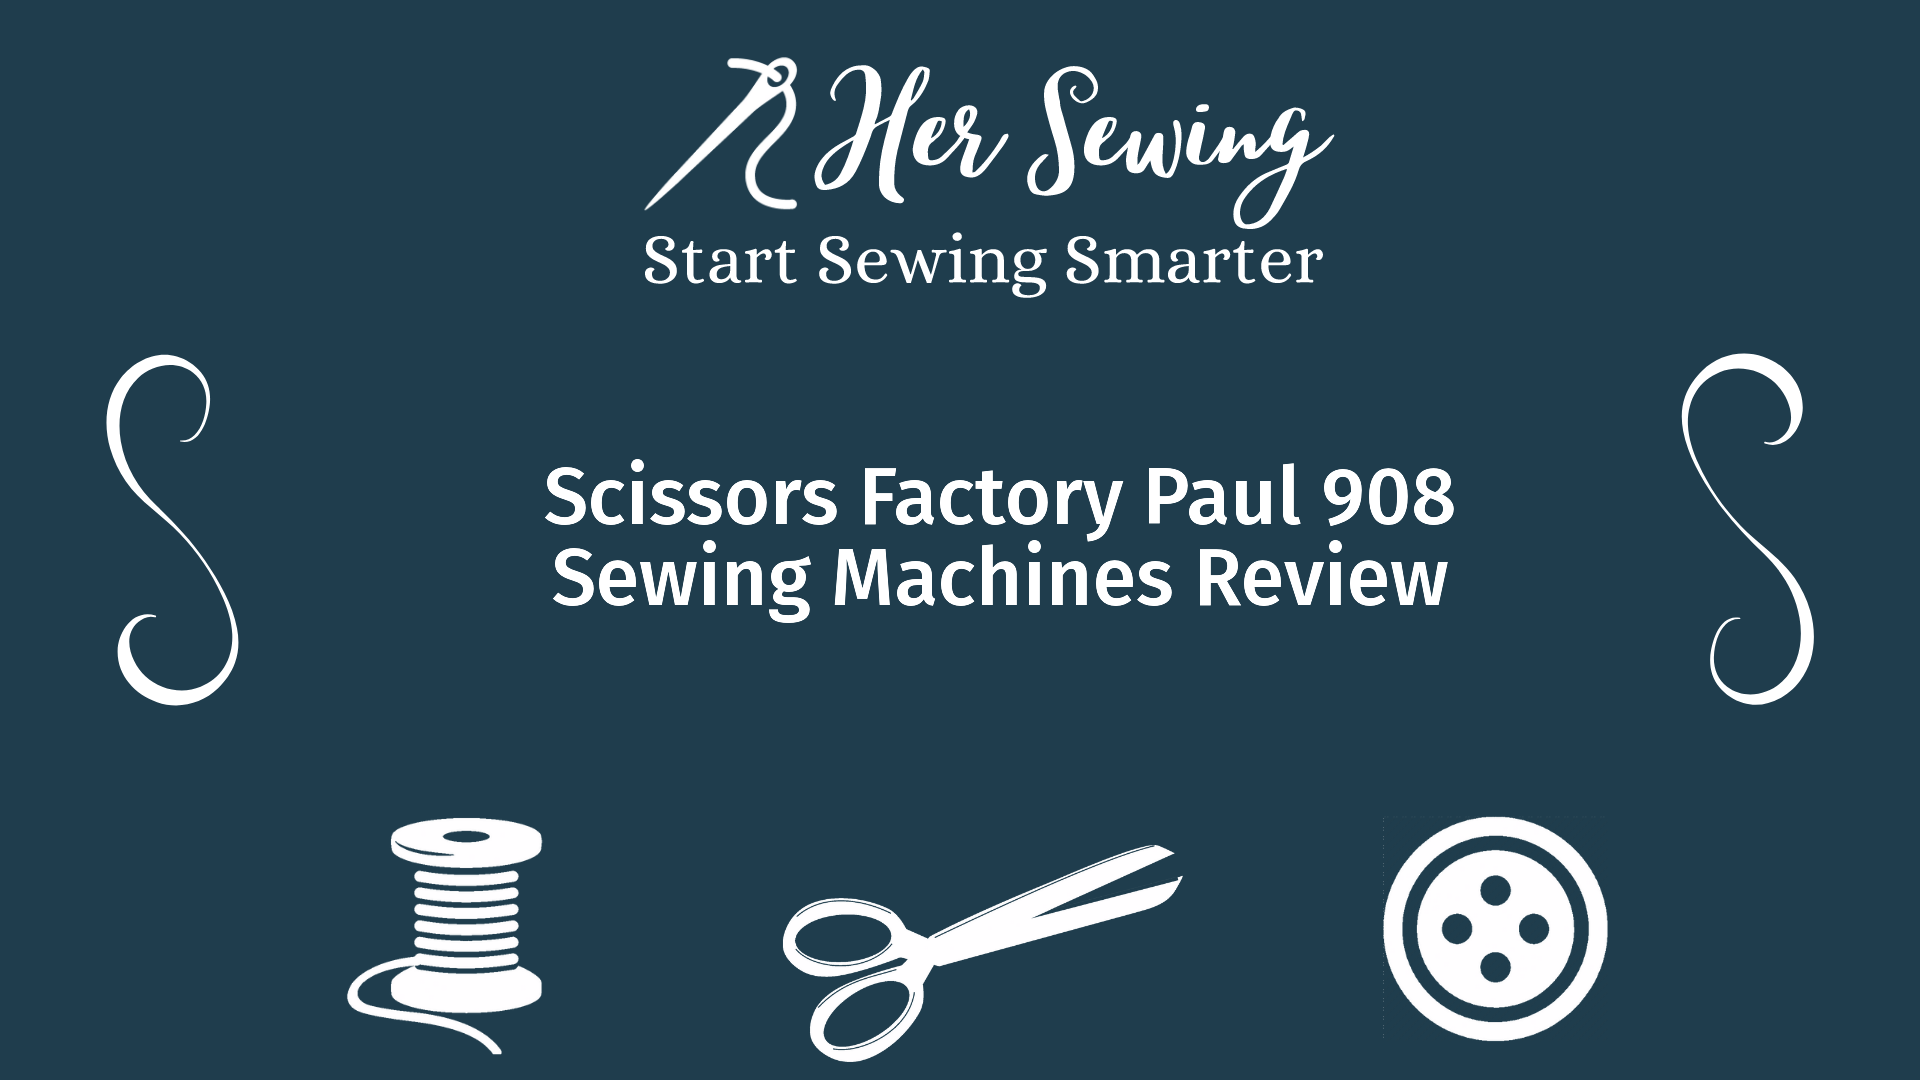 Scissors Factory Paul 908 Sewing Machines Review